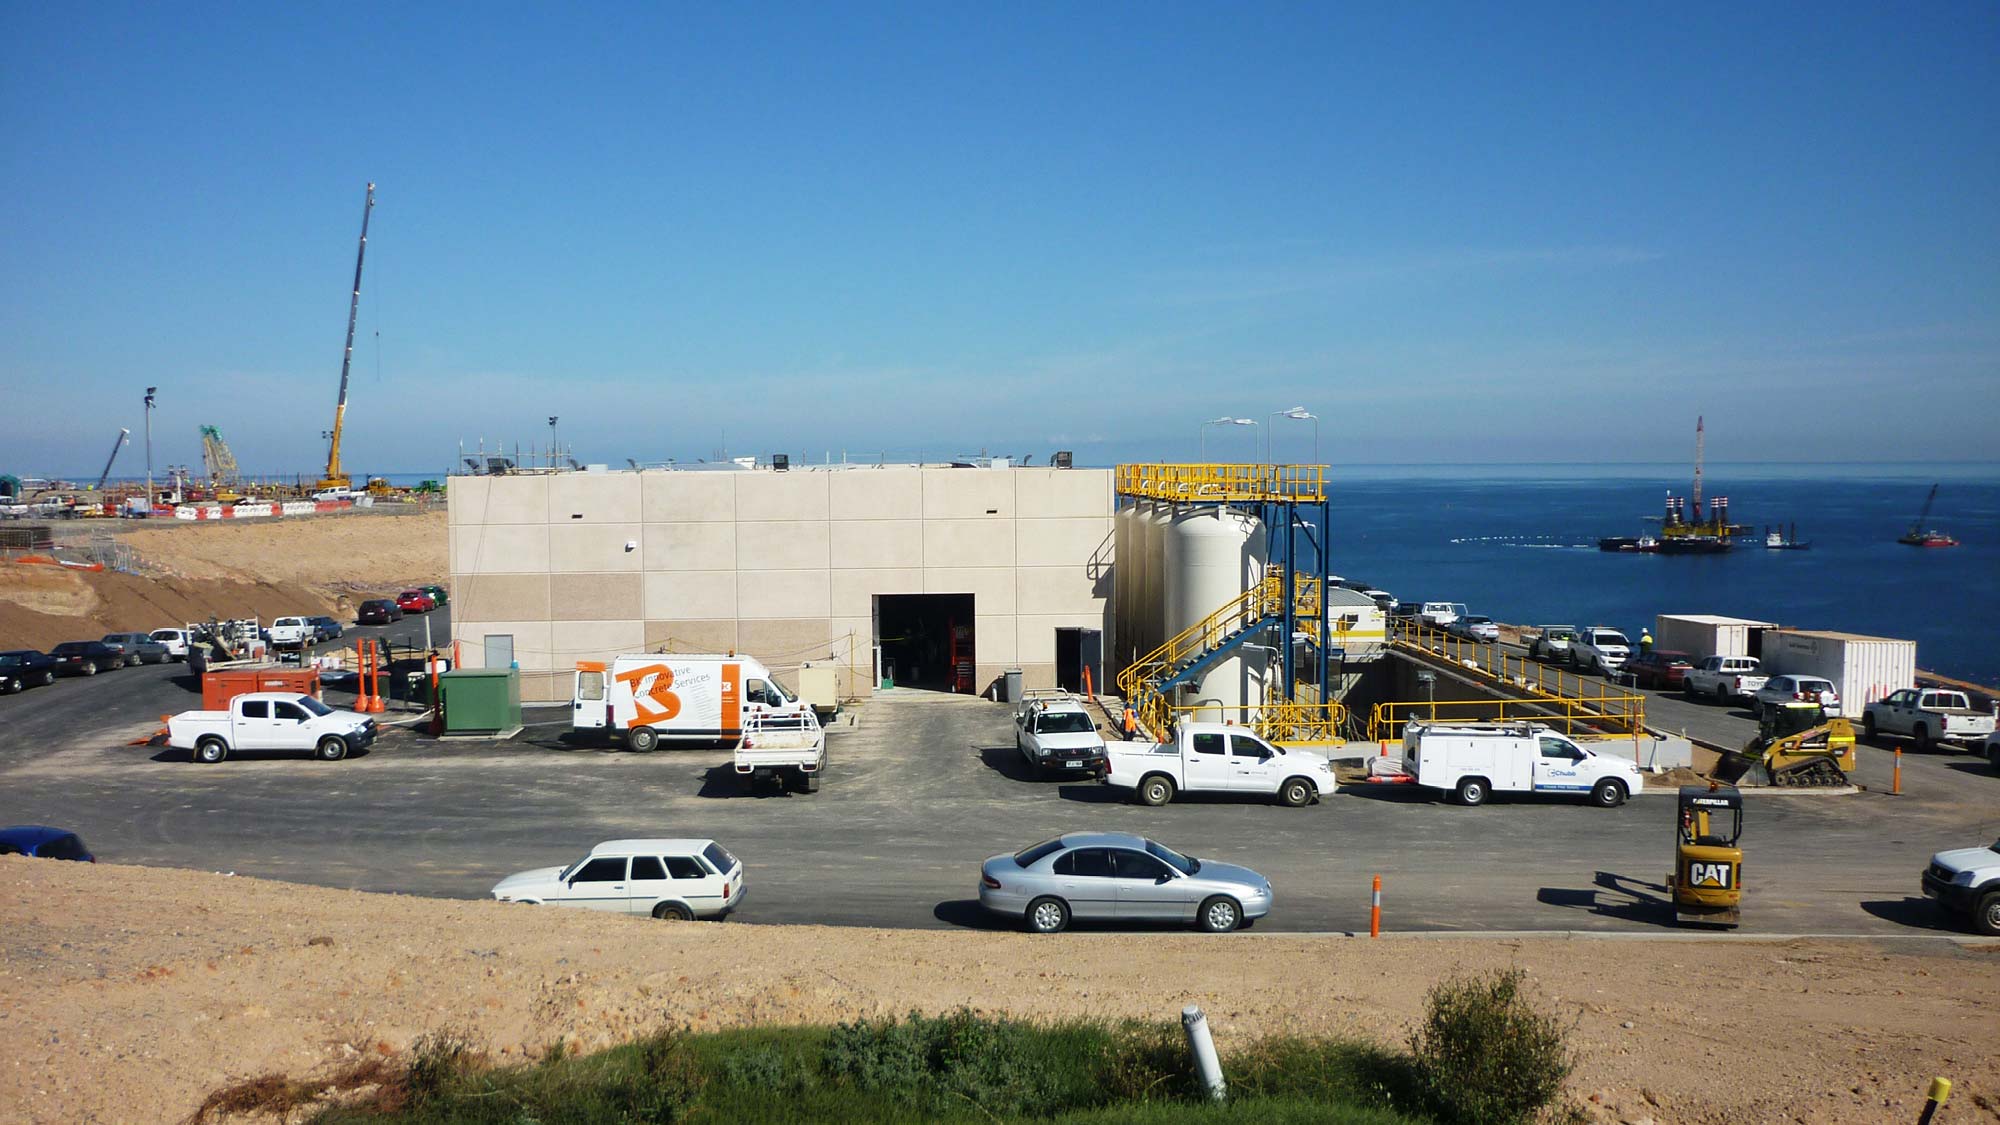 Adelaide Desalination Plant Transfer Pipeline System © Arup